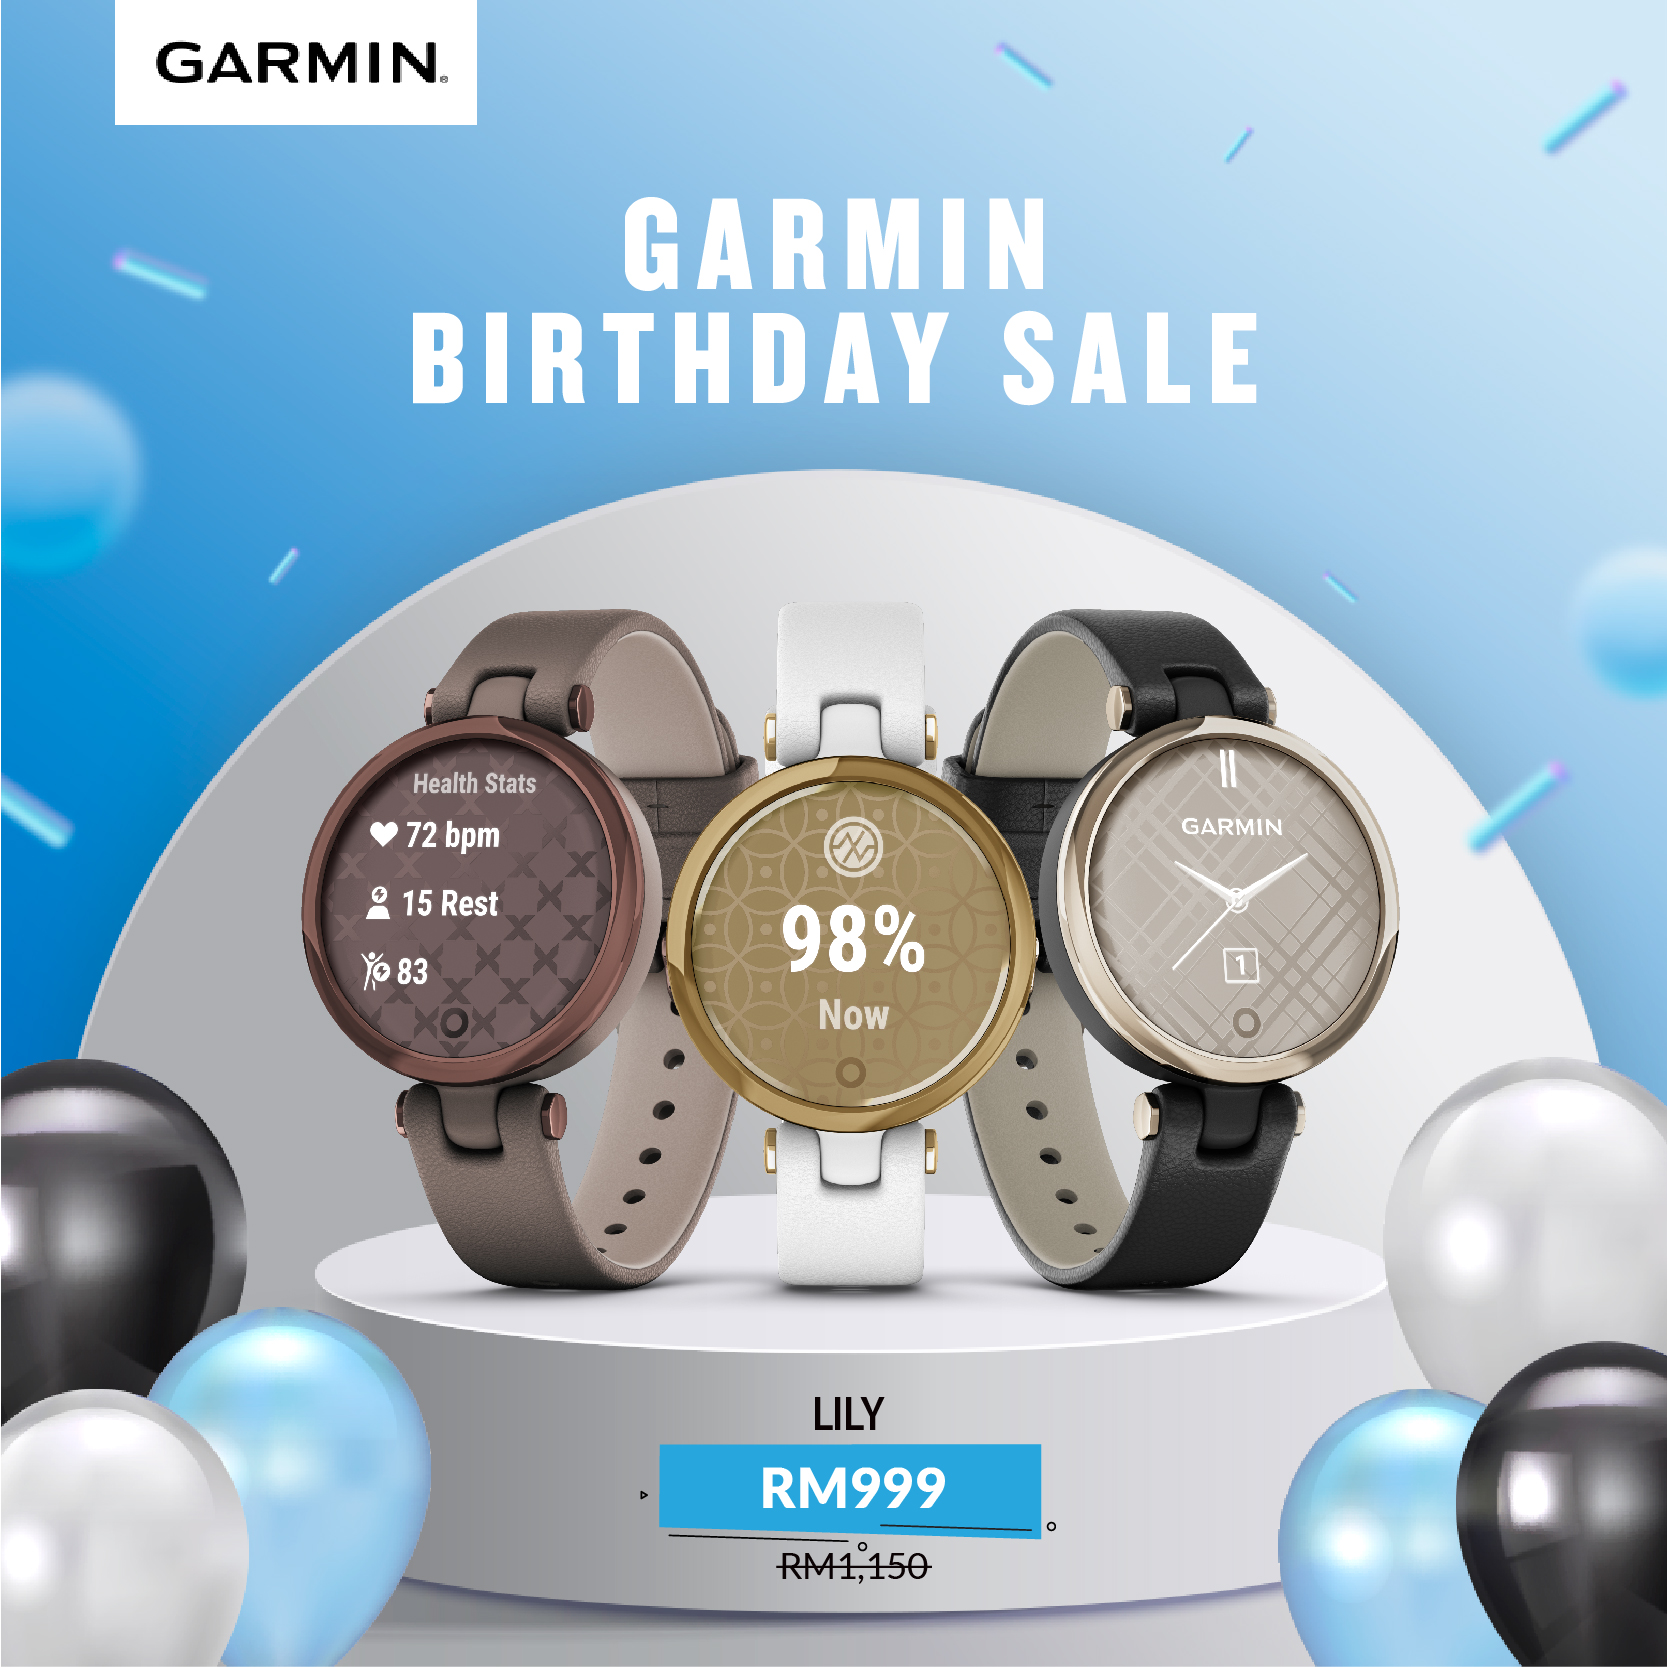 Garmin Malaysia on Twitter: "A happy to Garmin! Let us all celebrate this day with ongoing Birthday Sale from us! Our wish is be the better version of ourselves!